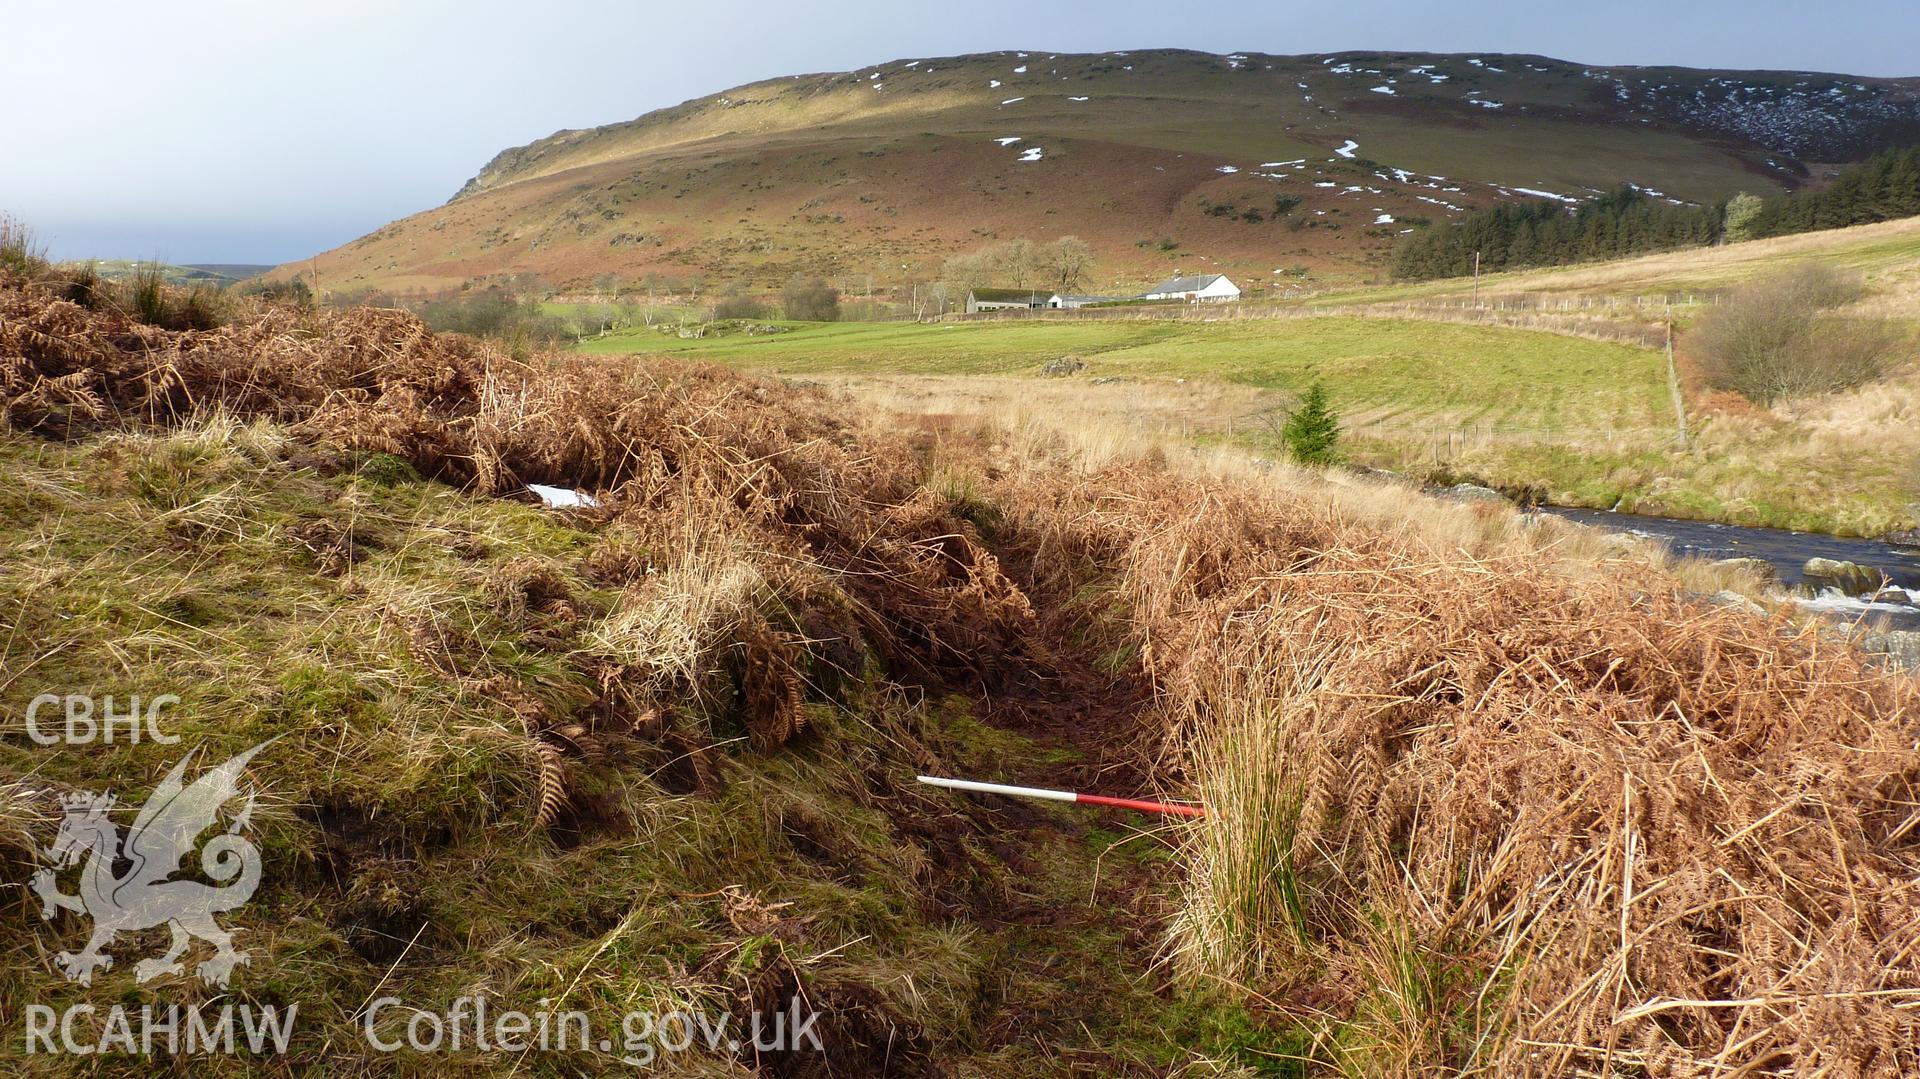 Continuation of the trackway, in an area close to the proposed weir. SN 8835 6275. Looking west. Photographed for Archaeological Desk Based Assessment of Afon Claerwen, Elan Valley, Rhayader. Assessment by Archaeology Wales in 2017-18. Project no. 2573.